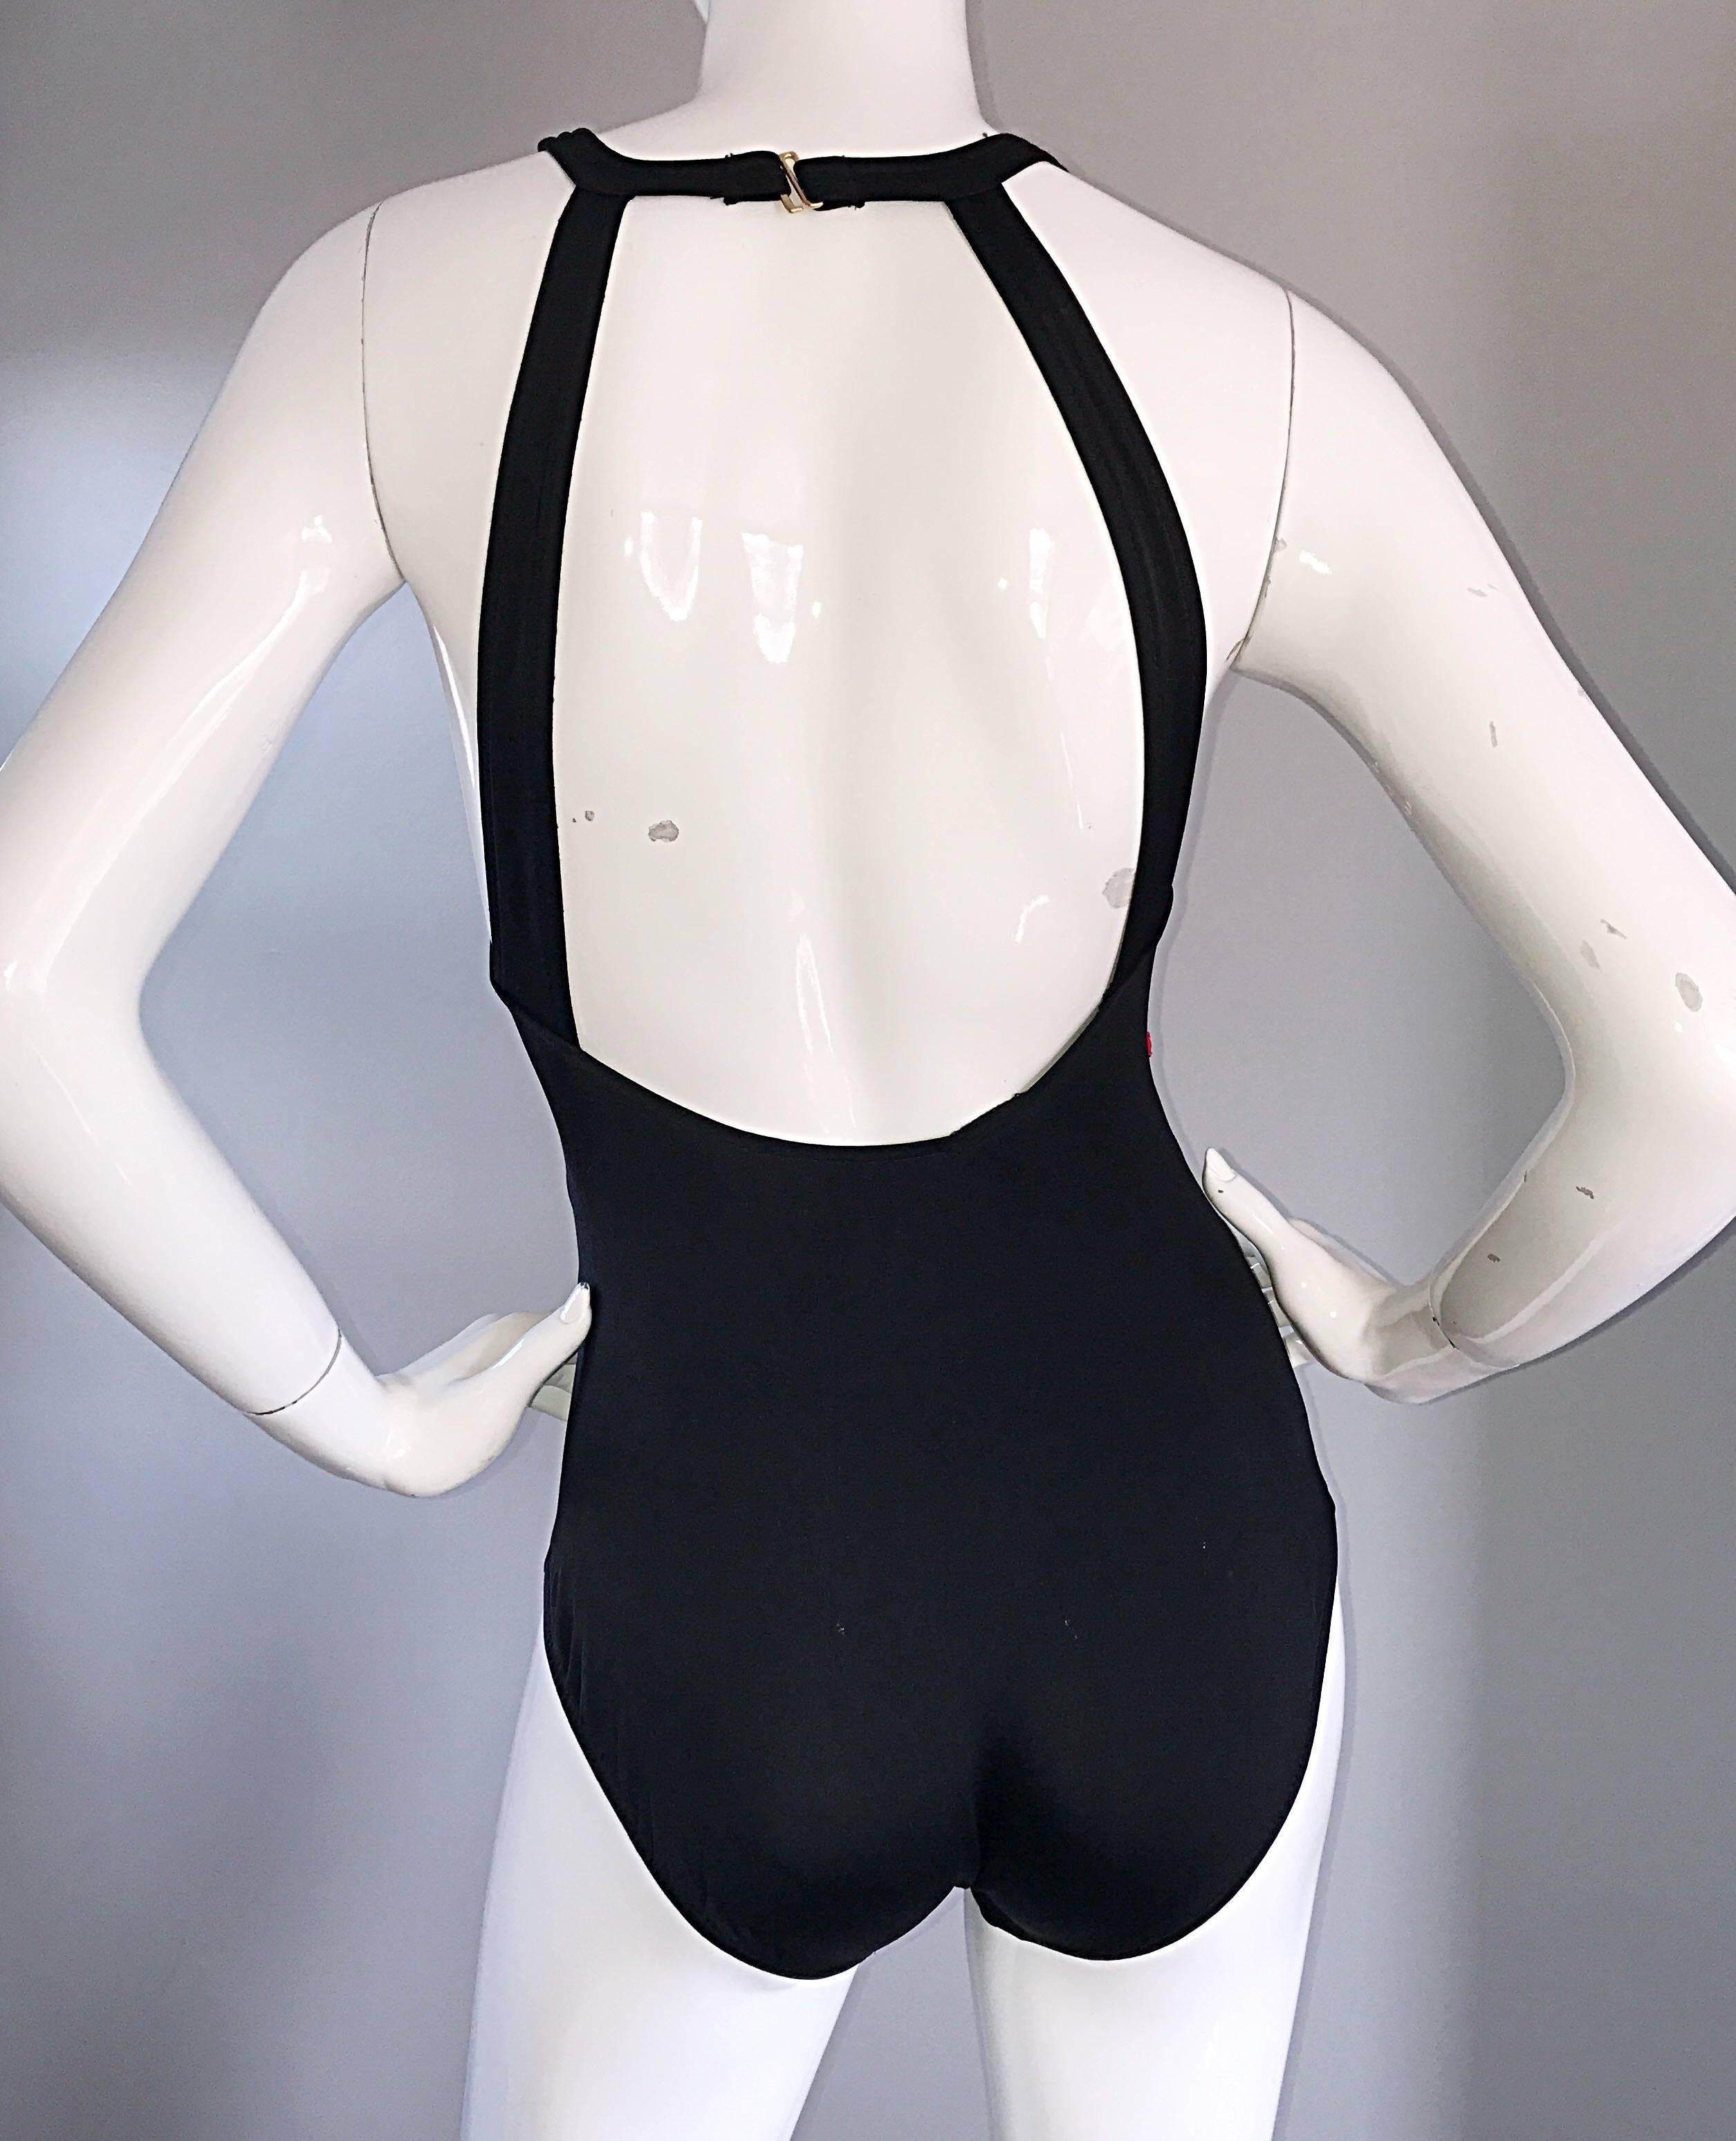 Black Bill Blass New Vintage 1990s 90s Chic One Piece Swimsuit / Bodysuit with Bows